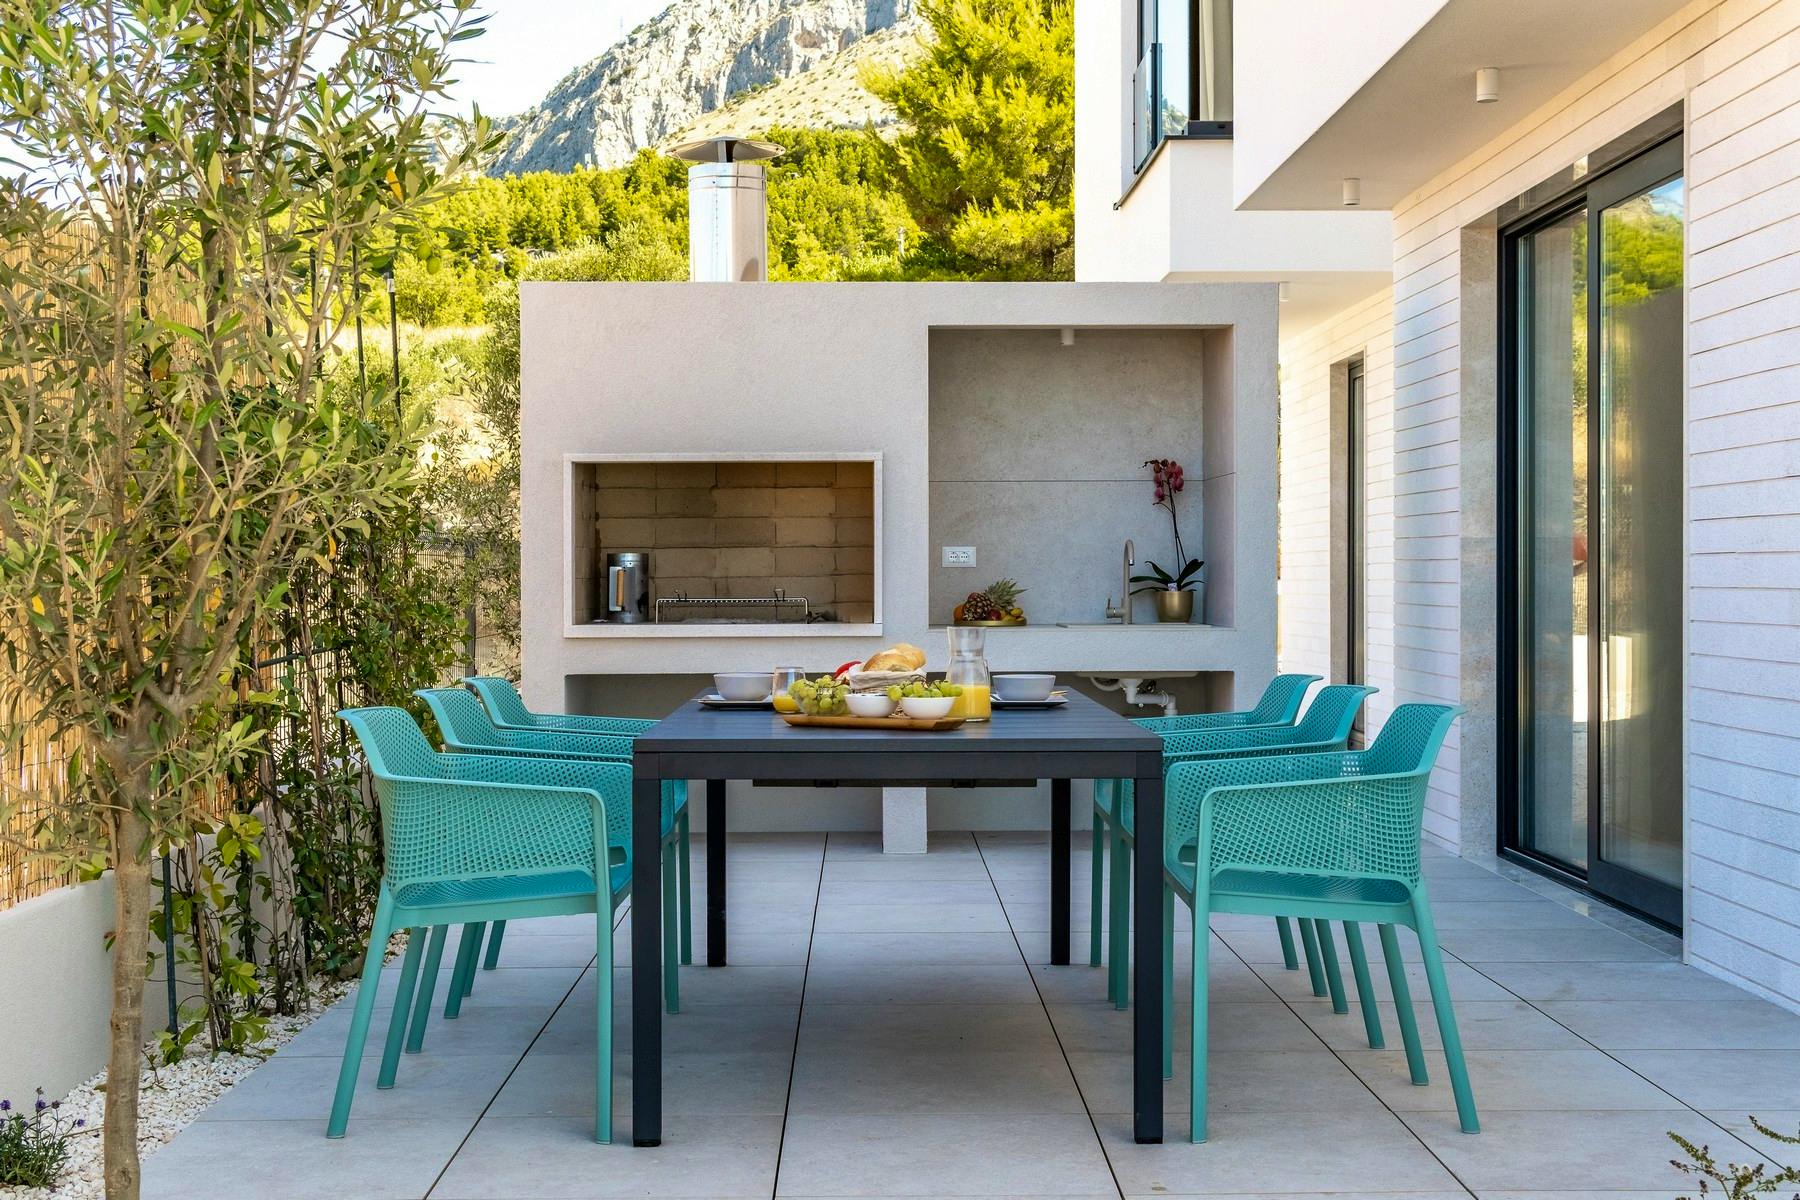 Outdoor kitchen with dining area